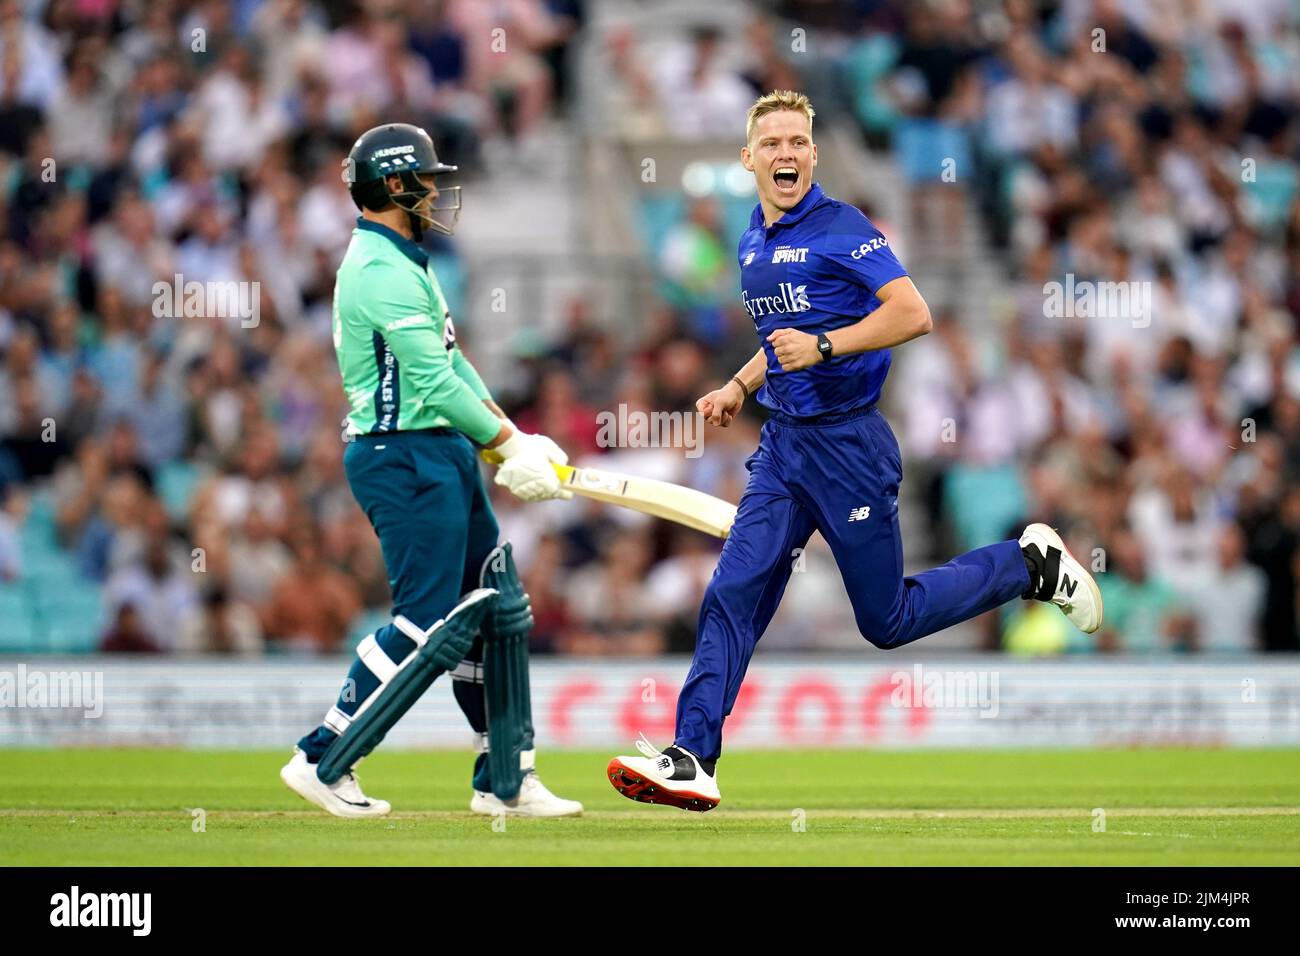 Oval Invincible's Jason Roy is out for 0 as London Spirit's Nathan Ellis, (right) celebrates taking his wicket during The Hundred match at The Kia Oval, London. Picture date: Thursday August 4, 2022. Stock Photo